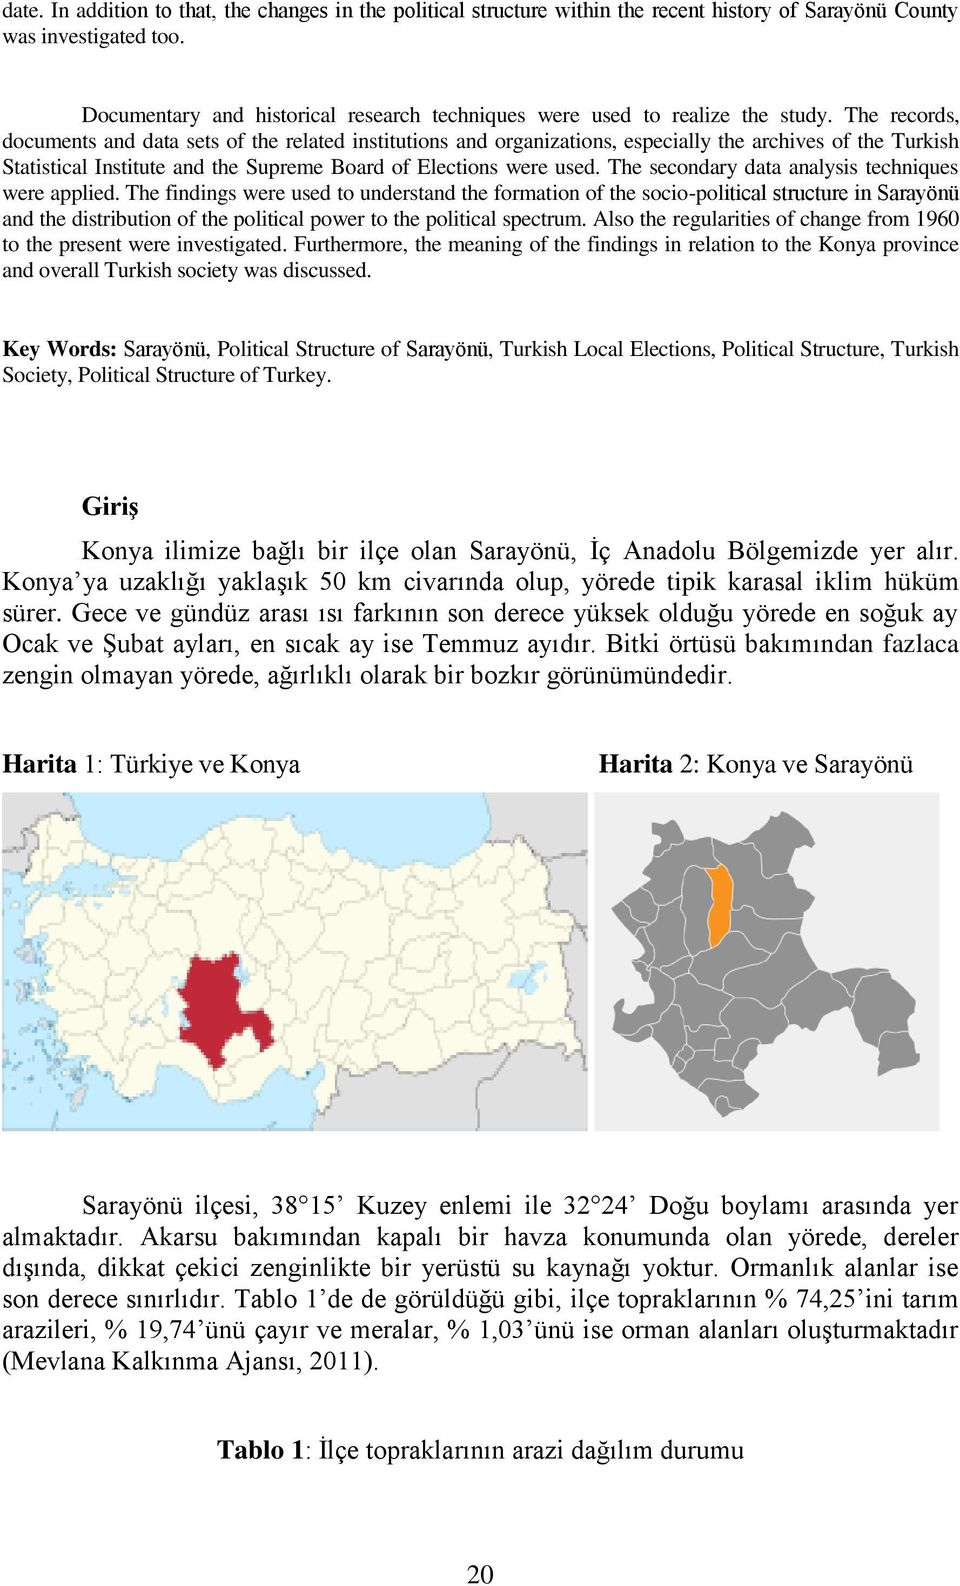 The records, documents and data sets of the related institutions and organizations, especially the archives of the Turkish Statistical Institute and the Supreme Board of Elections were used.